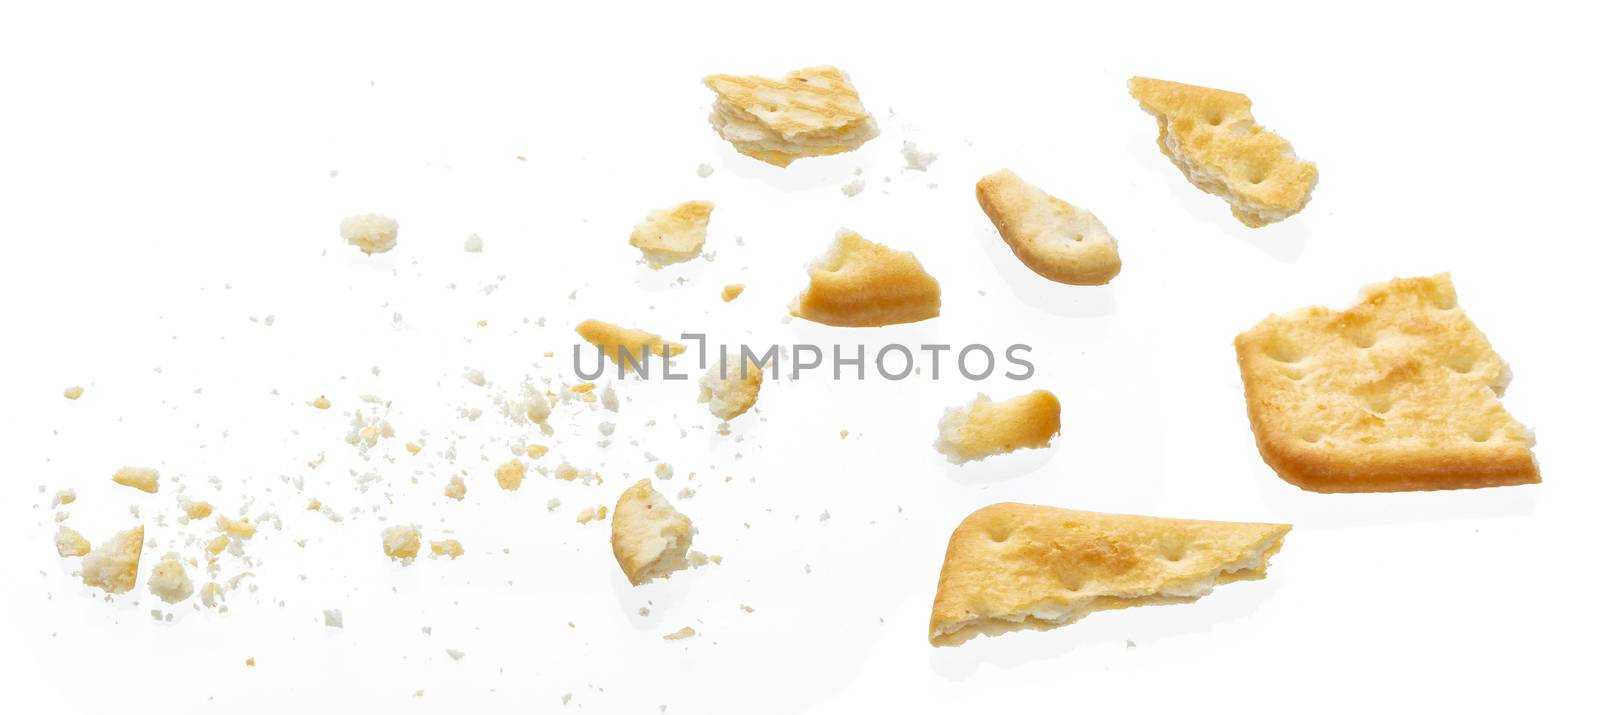 Broken cracker isolated on white background, top view by xamtiw